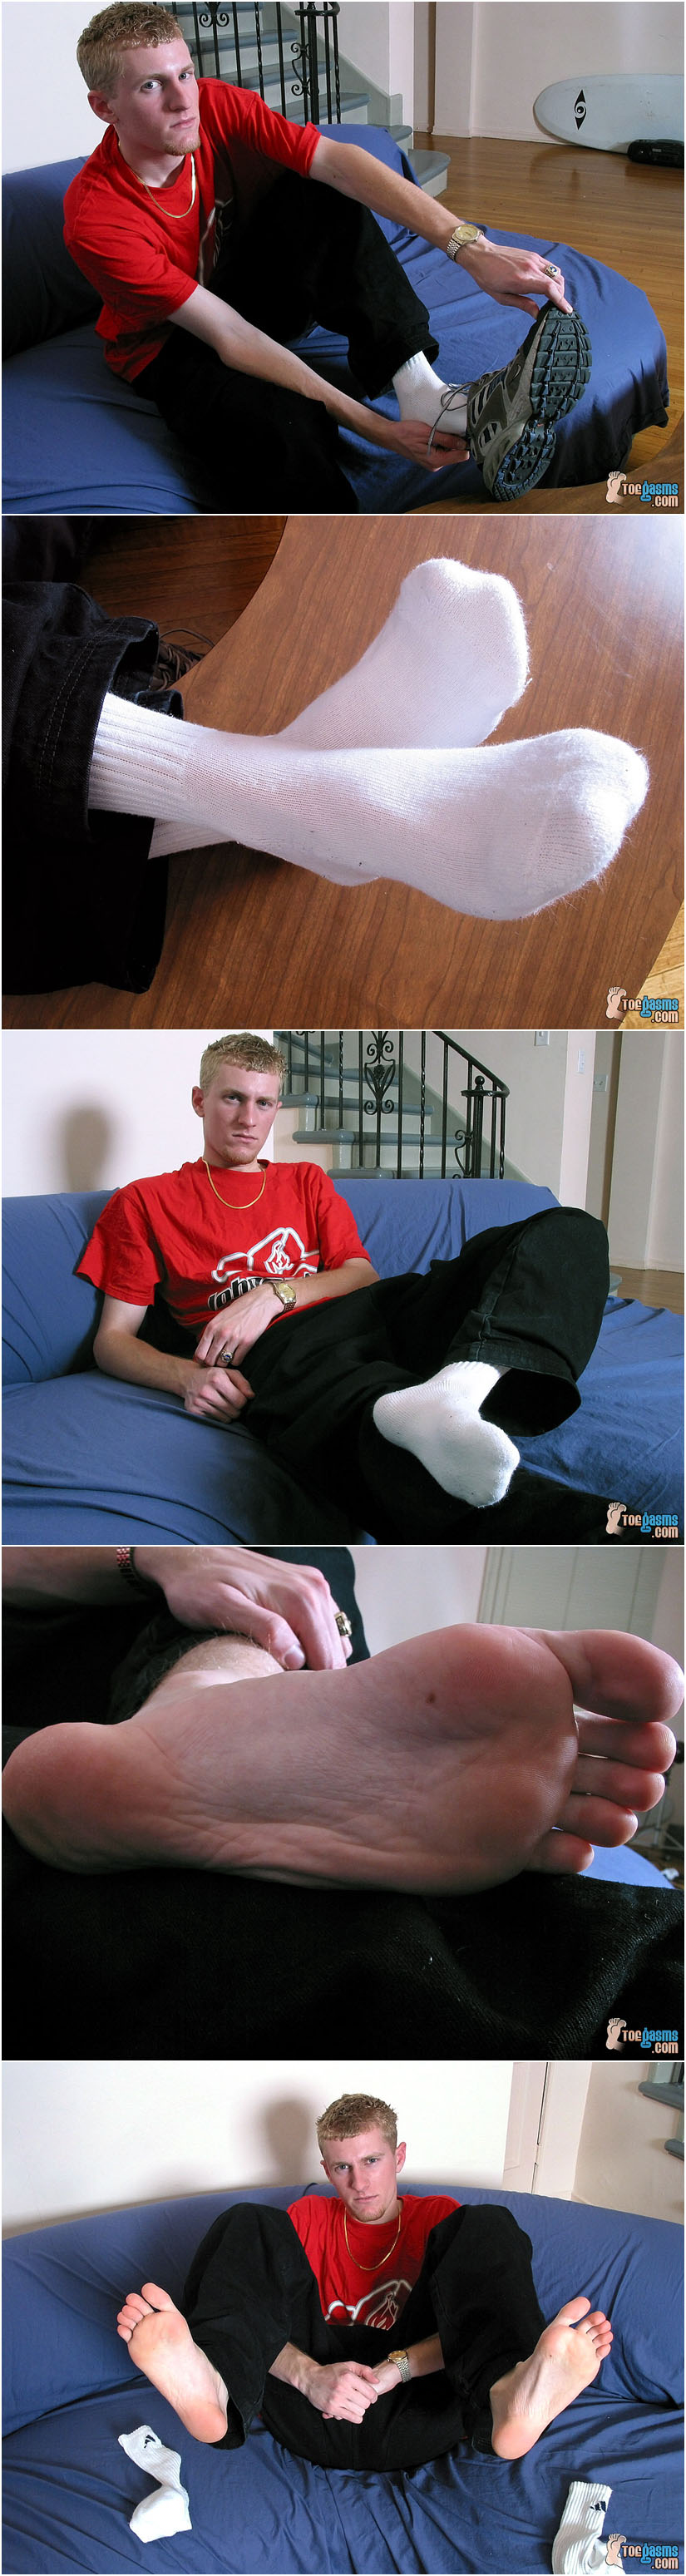 Amateur guy with attitude shows off his feet in white socks